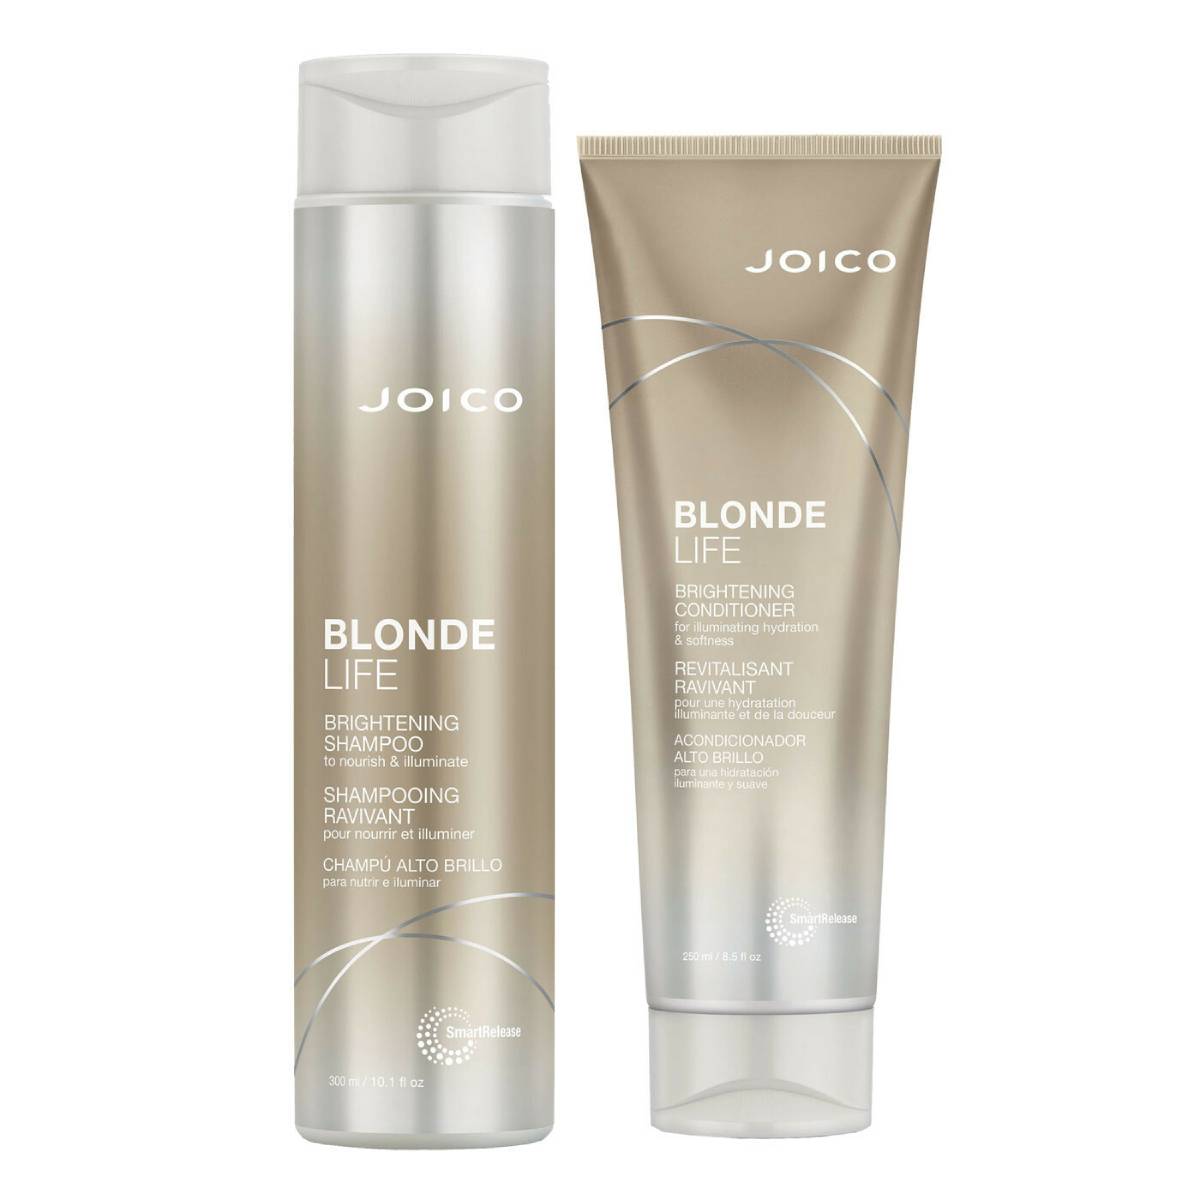 Joico Blonde Life Shampoo 300ml and Conditioner 250ml Gift Set